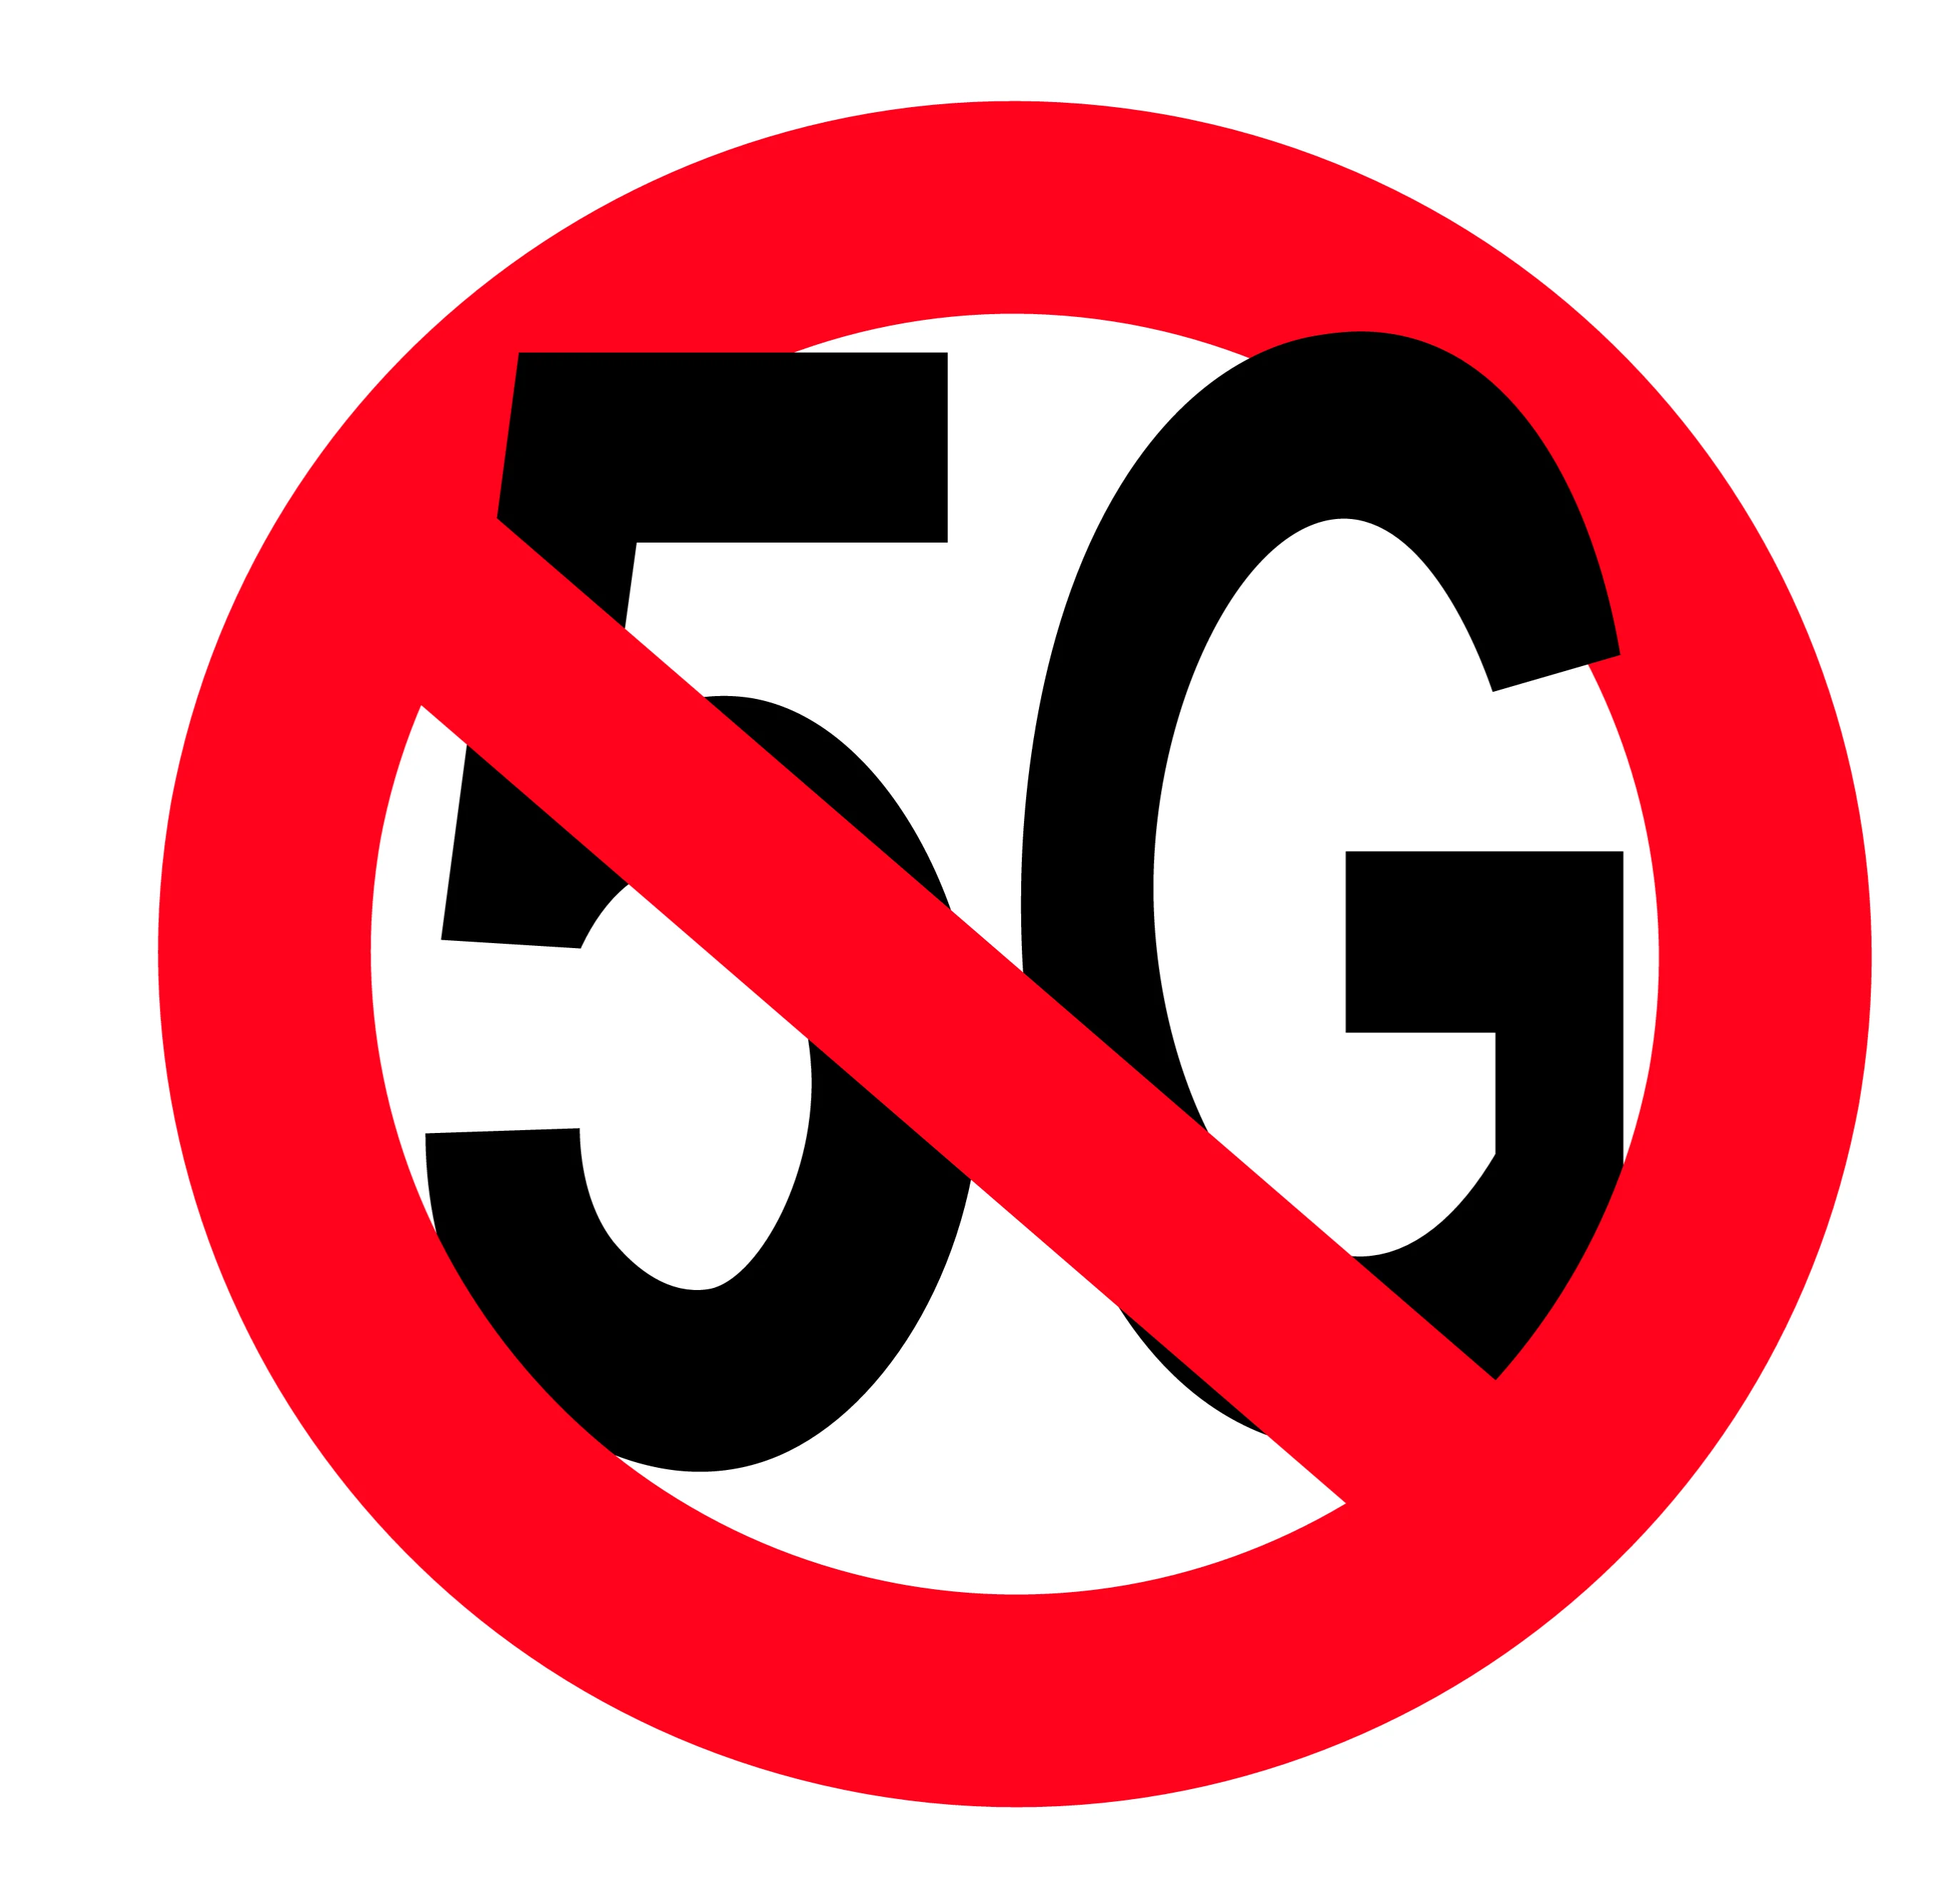 The telecoms industry needs more than facts to fight 5G conspiracies